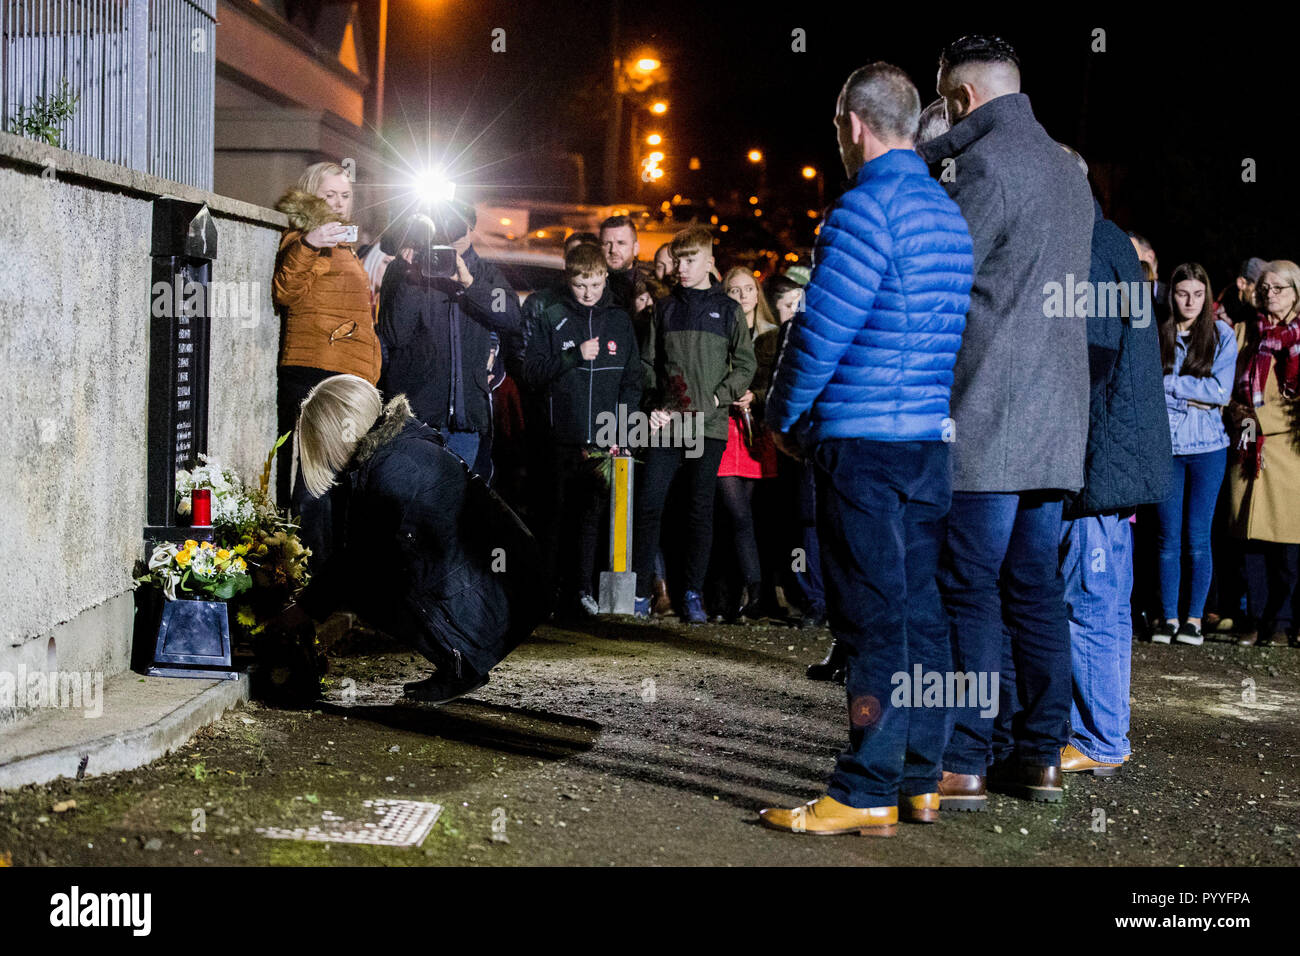 Daughter of John Burns, Gillian laying a wreath, as seven other members of the Greysteel massacre families look on during a vigil to commemorate the 25th anniversary of eight people being murdered on 30 October 1993 by members of the UFF. Stock Photo